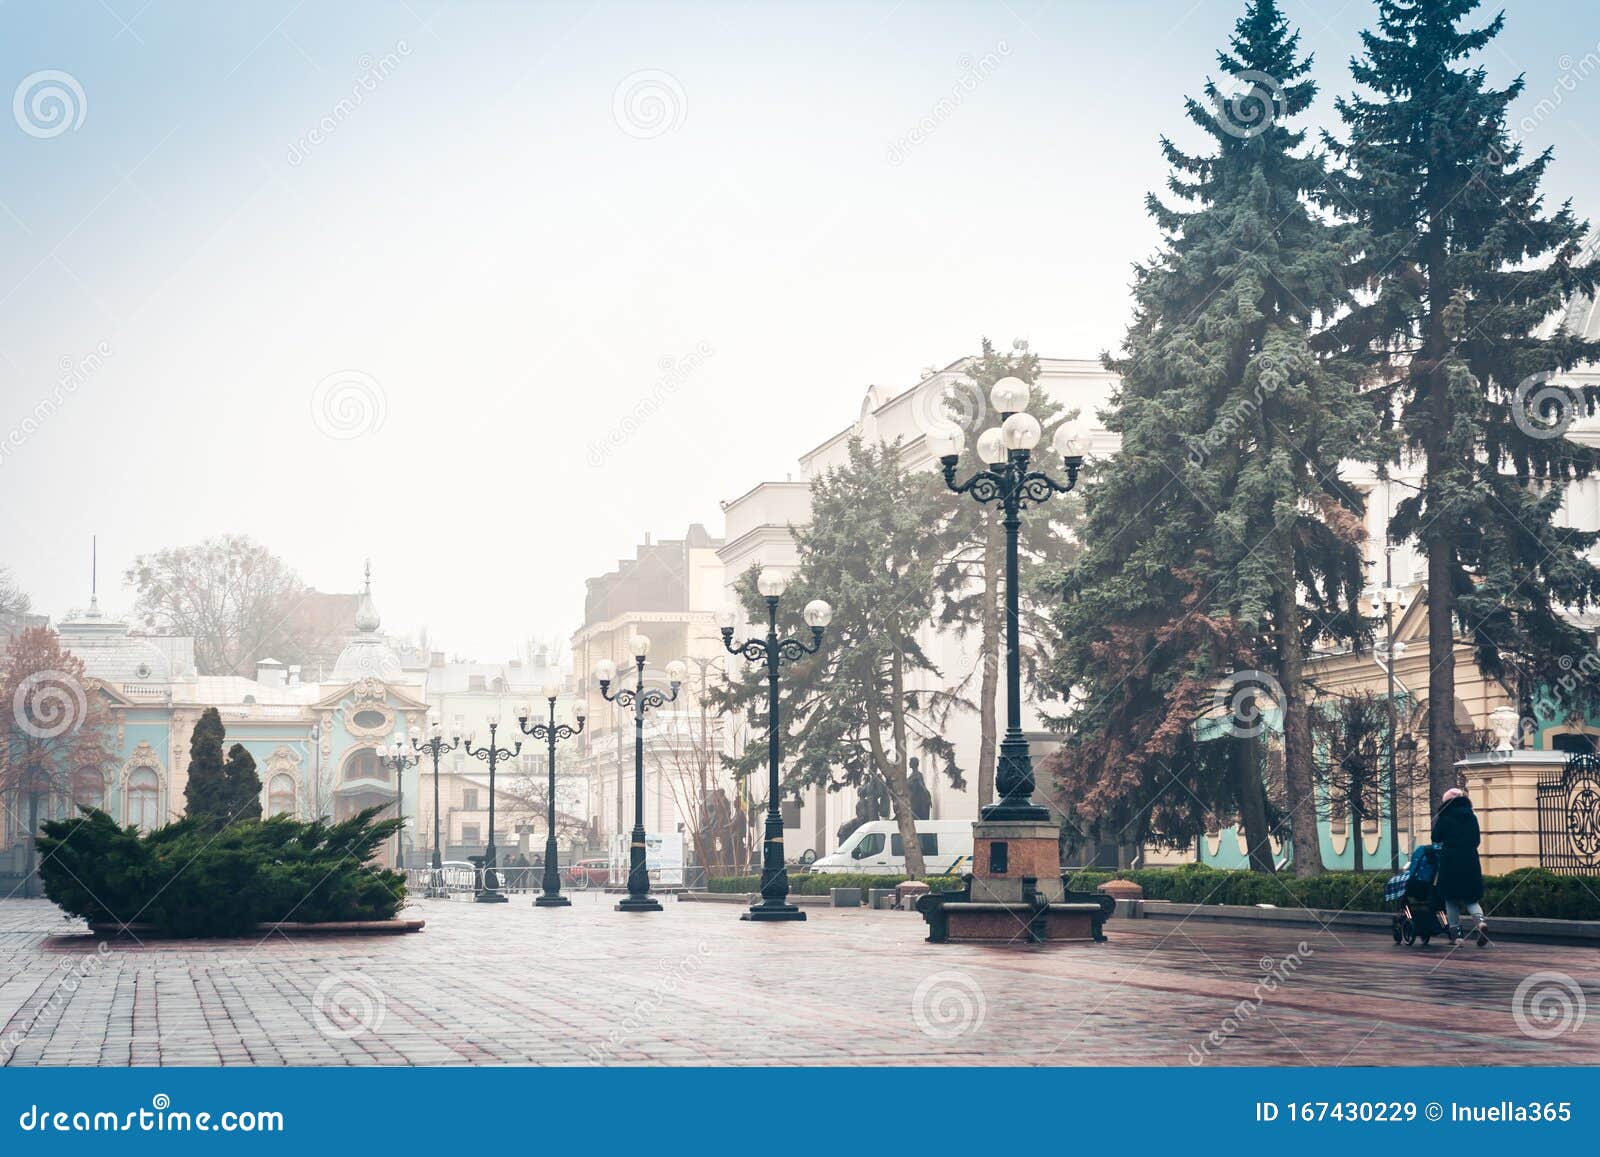 park alley with street lights in front of the mariinsky palace and the verkhovna rada, the supreme council of ukraine in kiev